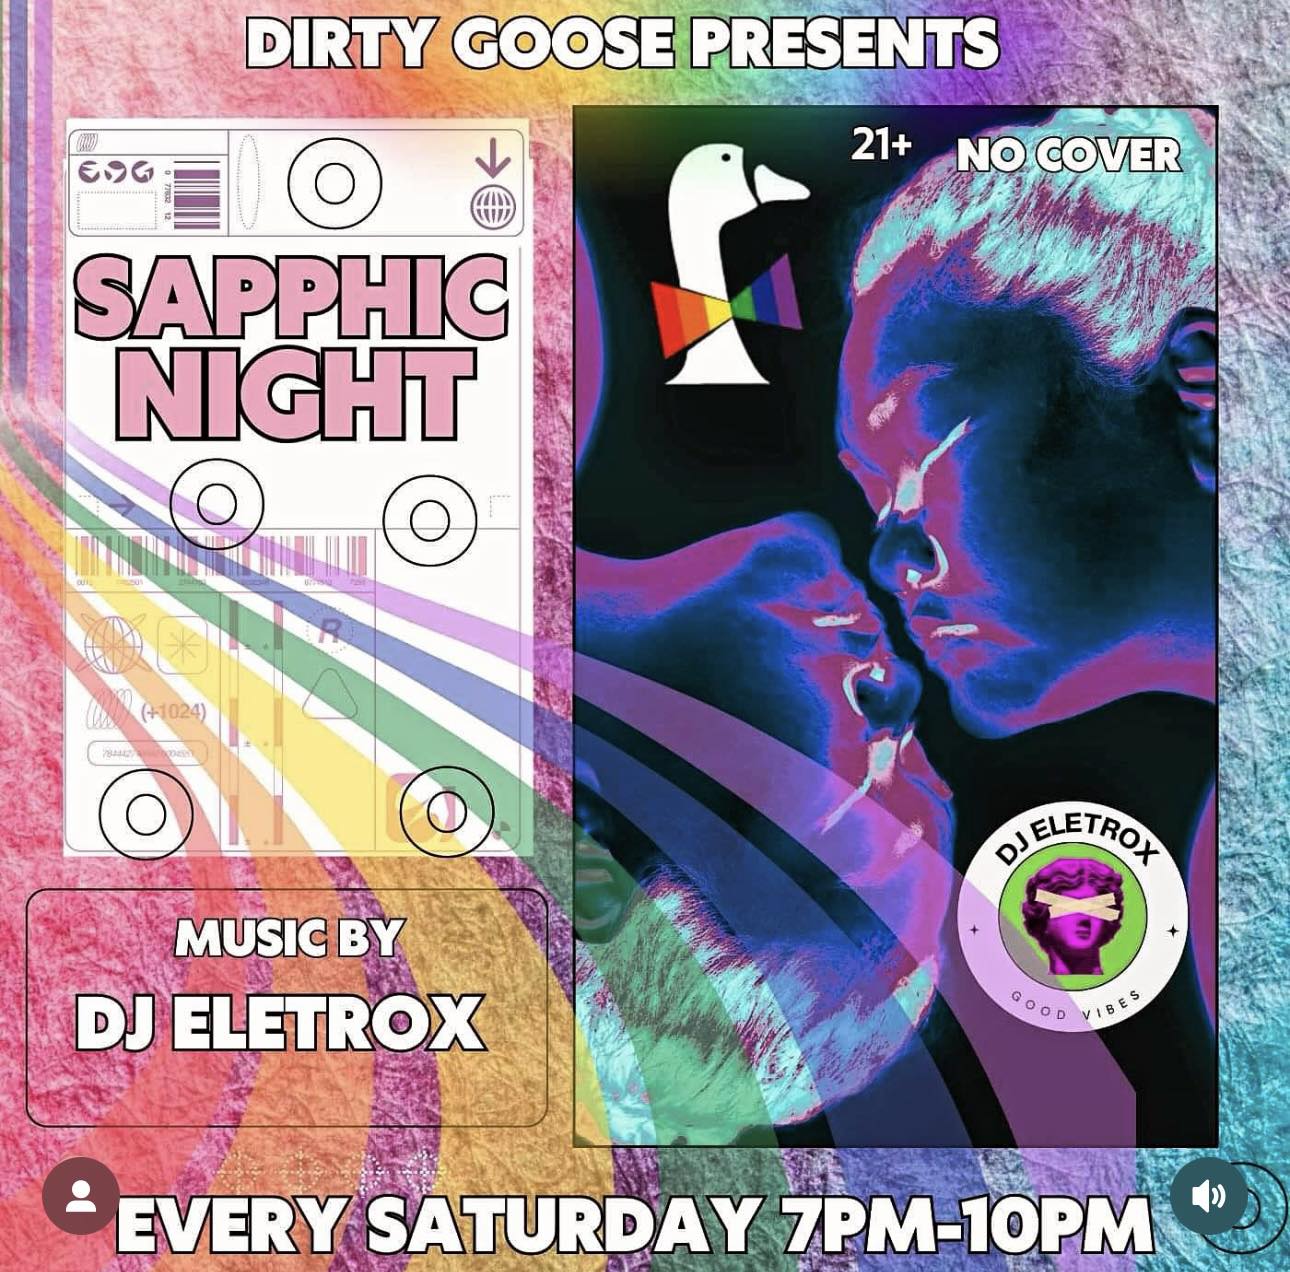 Dirty Goose presents Sapphic Night: Every Saturday 7pm-10pm in Washington, DC.